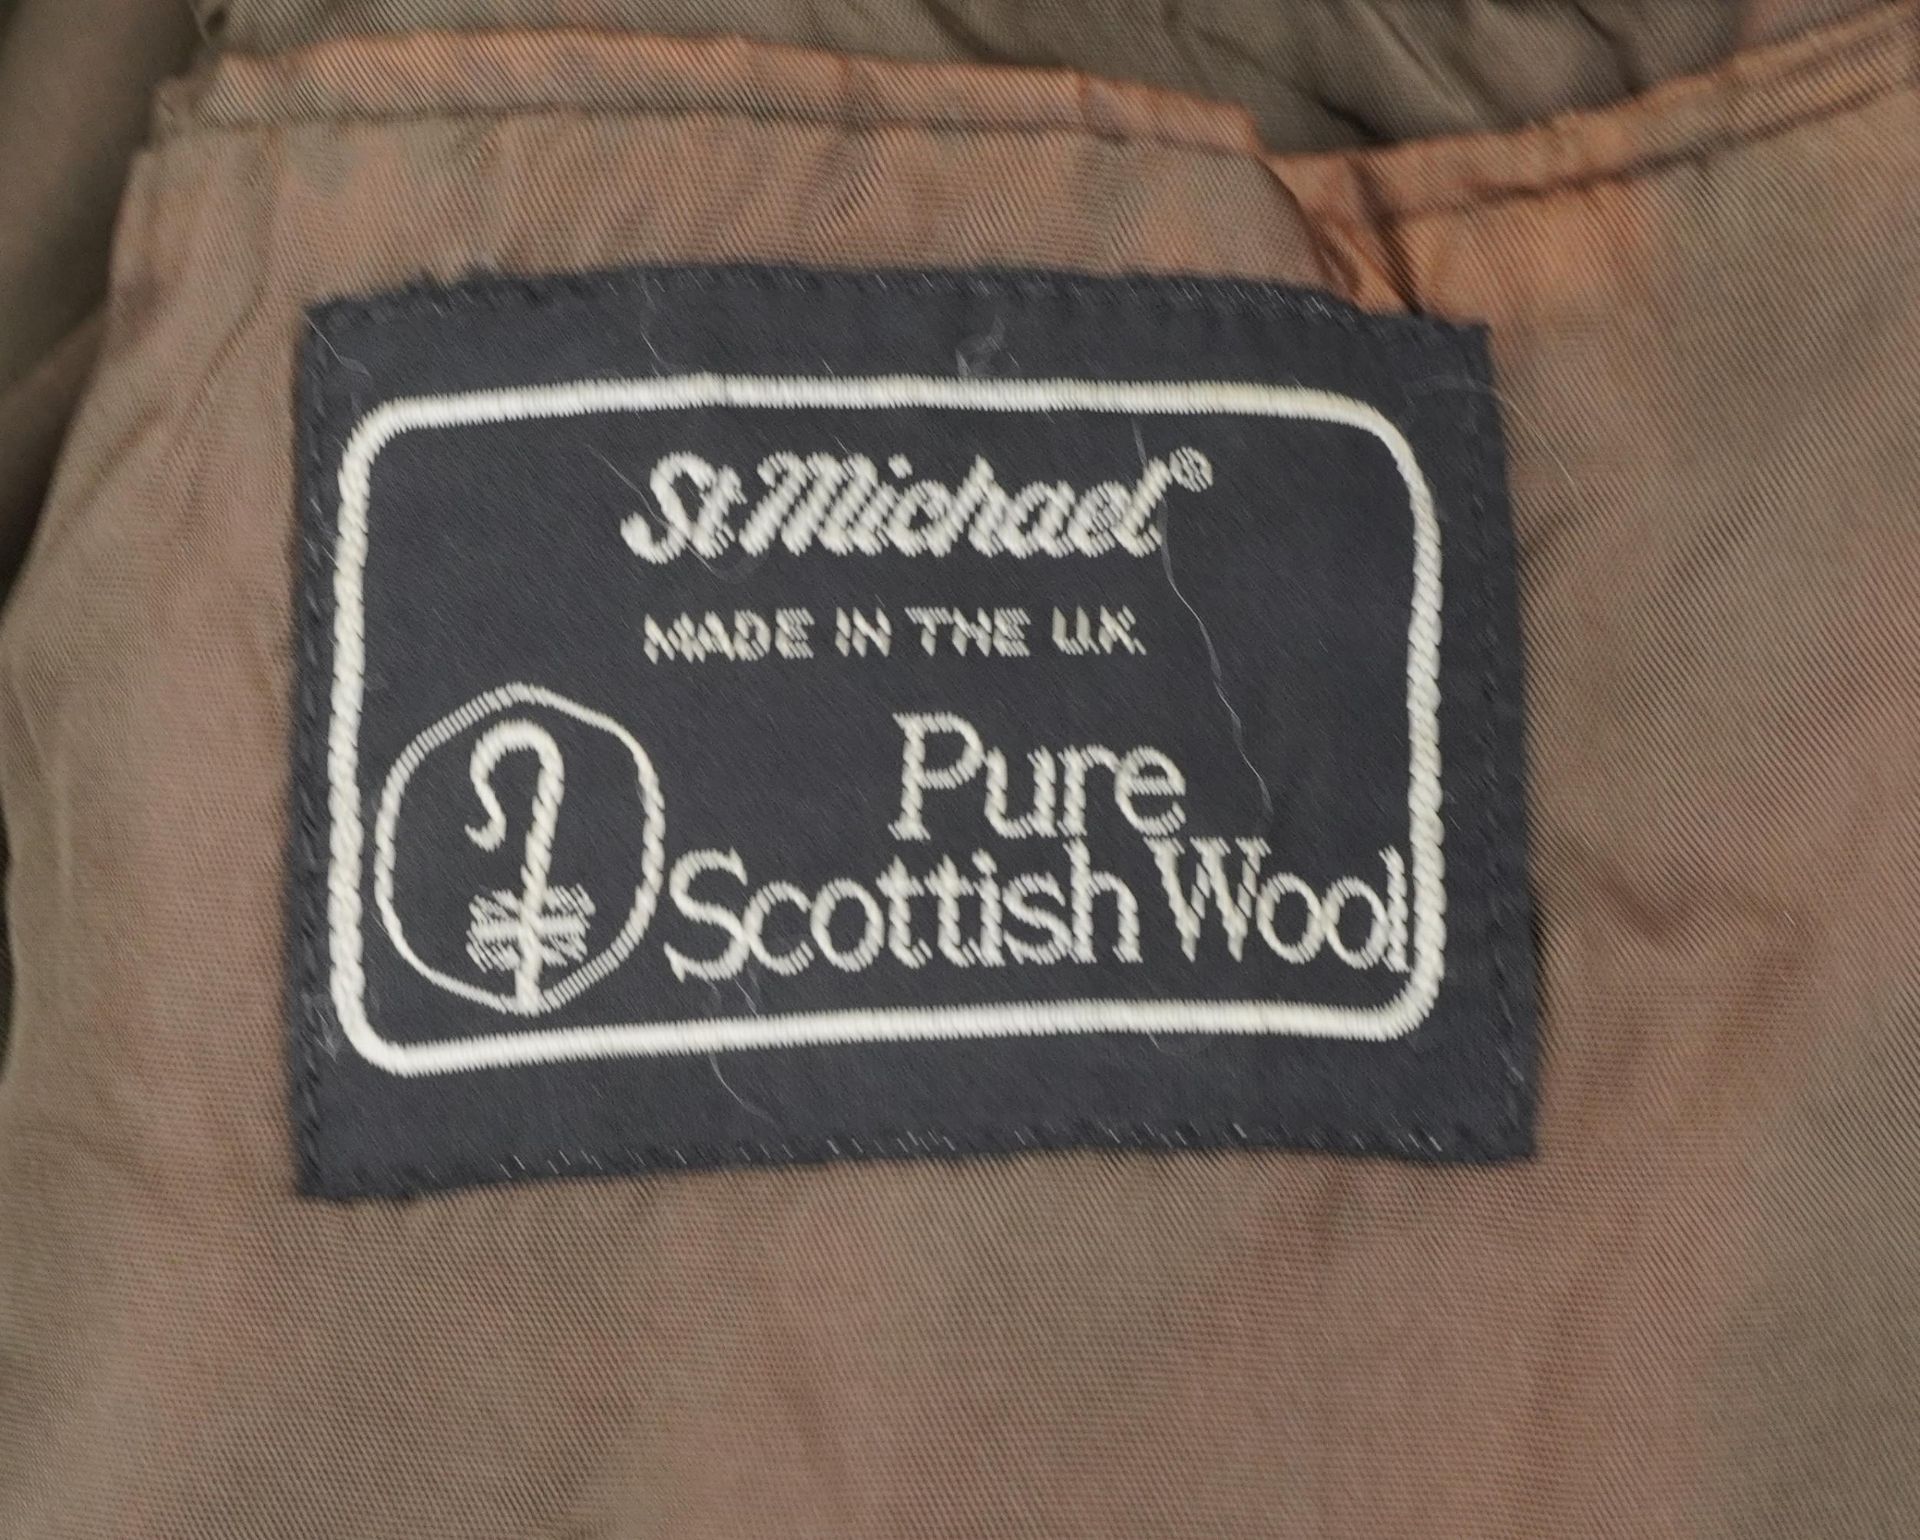 Two Harris tweed gentlemen's pure Scottish wool jackets, 80cm in length : For further information on - Image 4 of 4